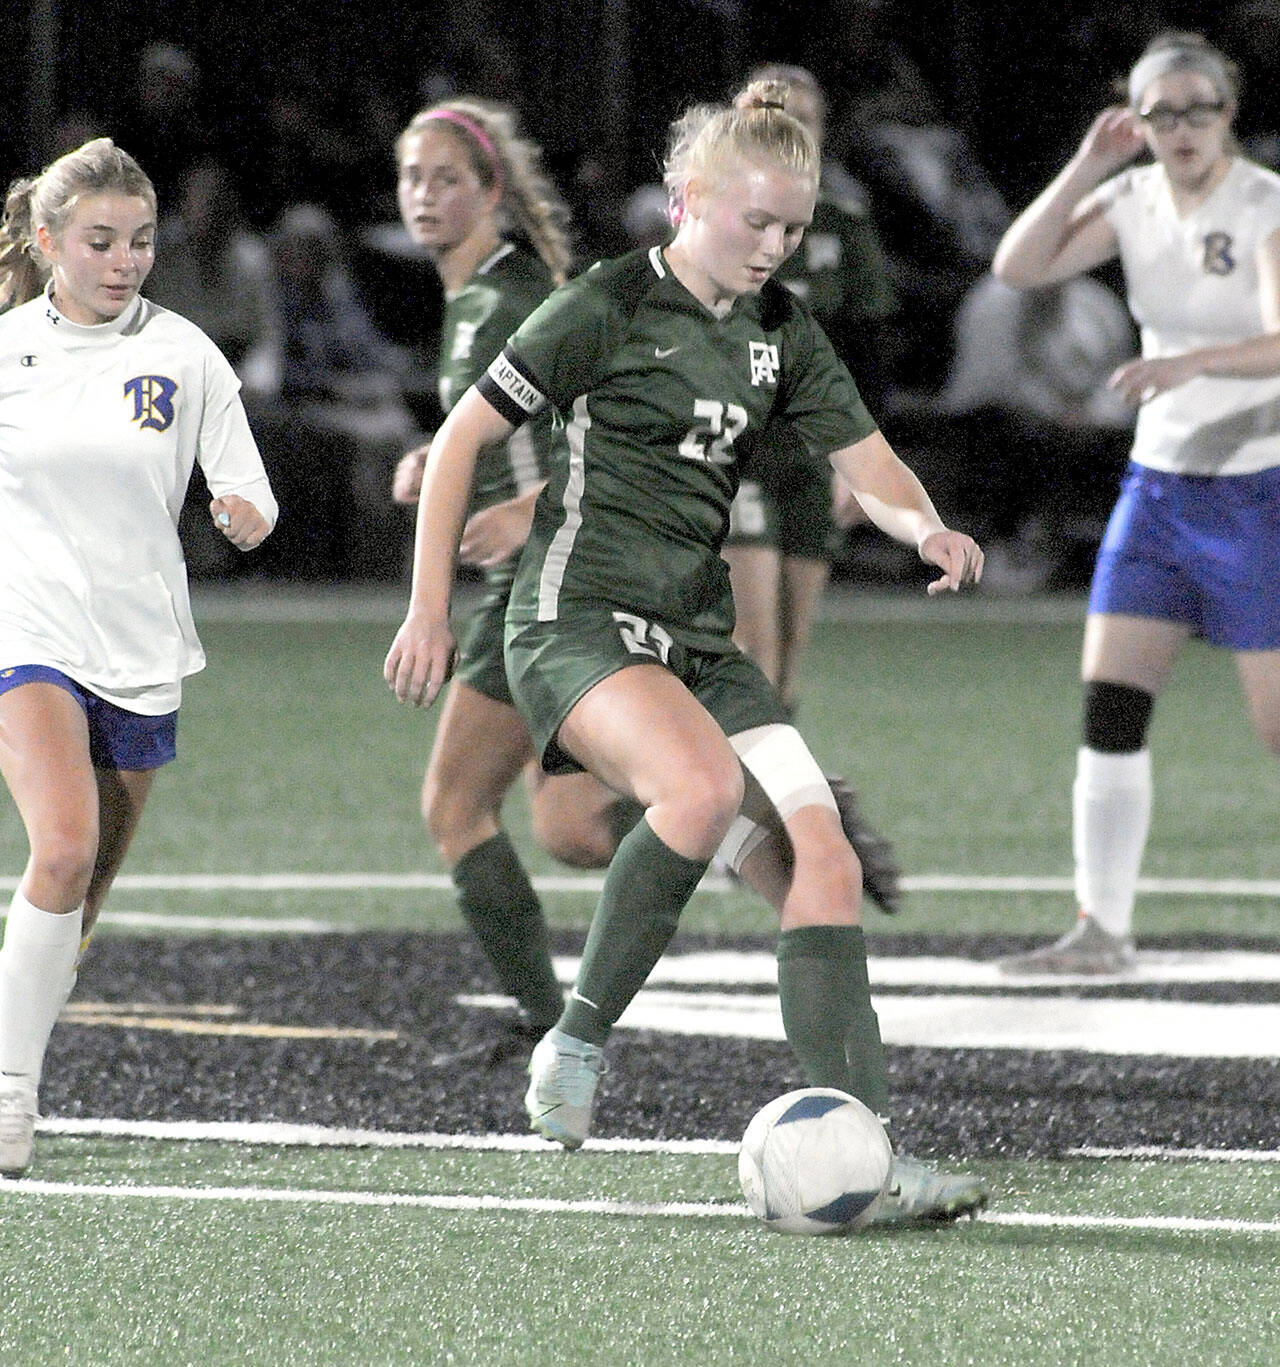 Port Angeles’ Paige Mason, center, slips past Bremerton’s Melanie Unrich at midfieldd during Tuesday’s match at Peninsula College. (Keith Thorpe/Peninsula Daily News)